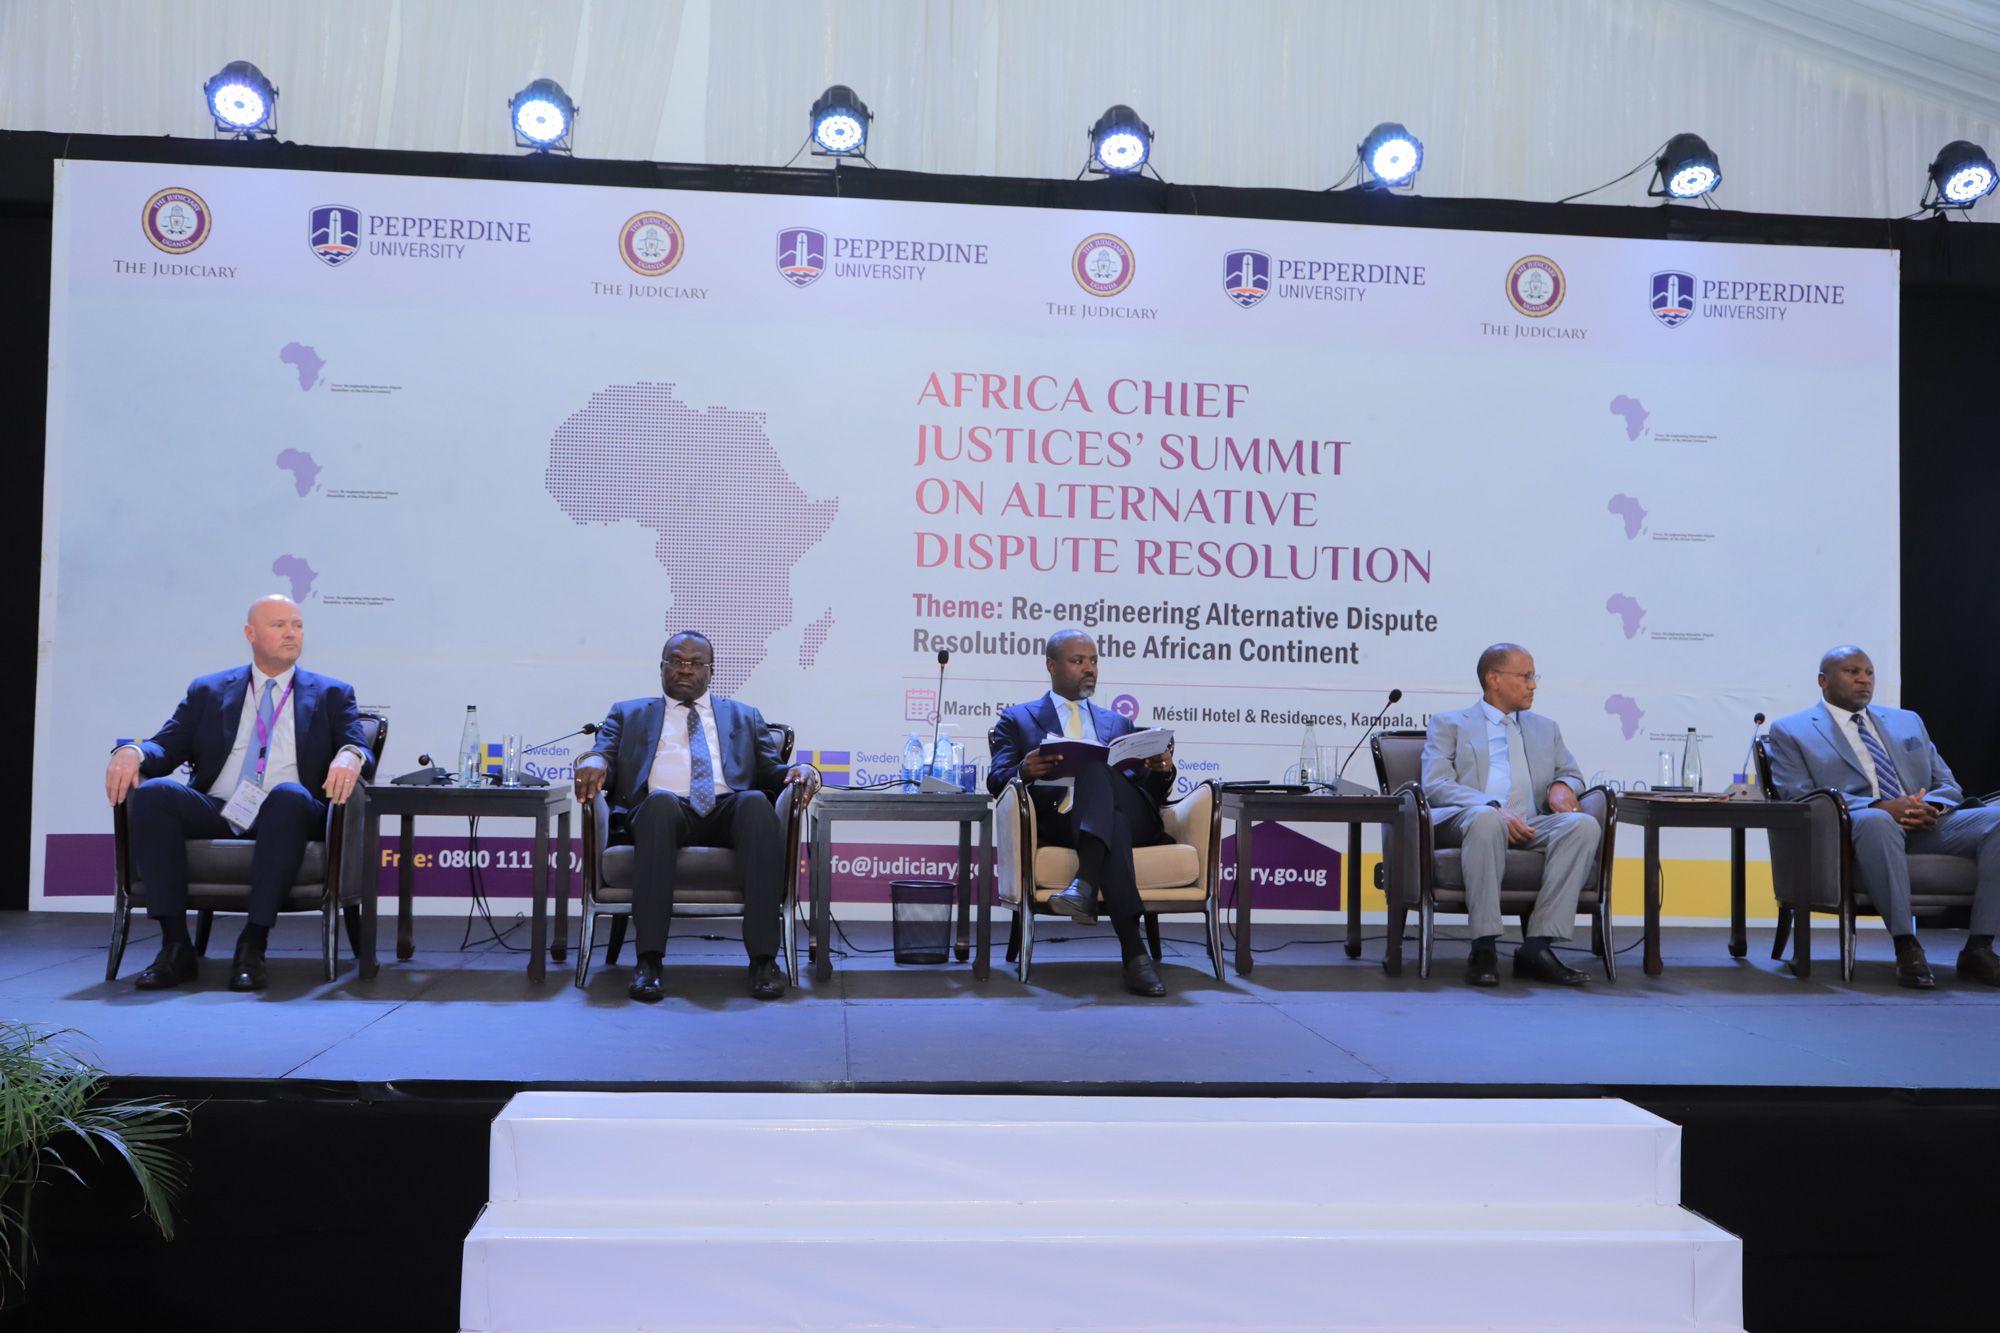 The African Chief Justices' Summit on Alternative Dispute Resolution